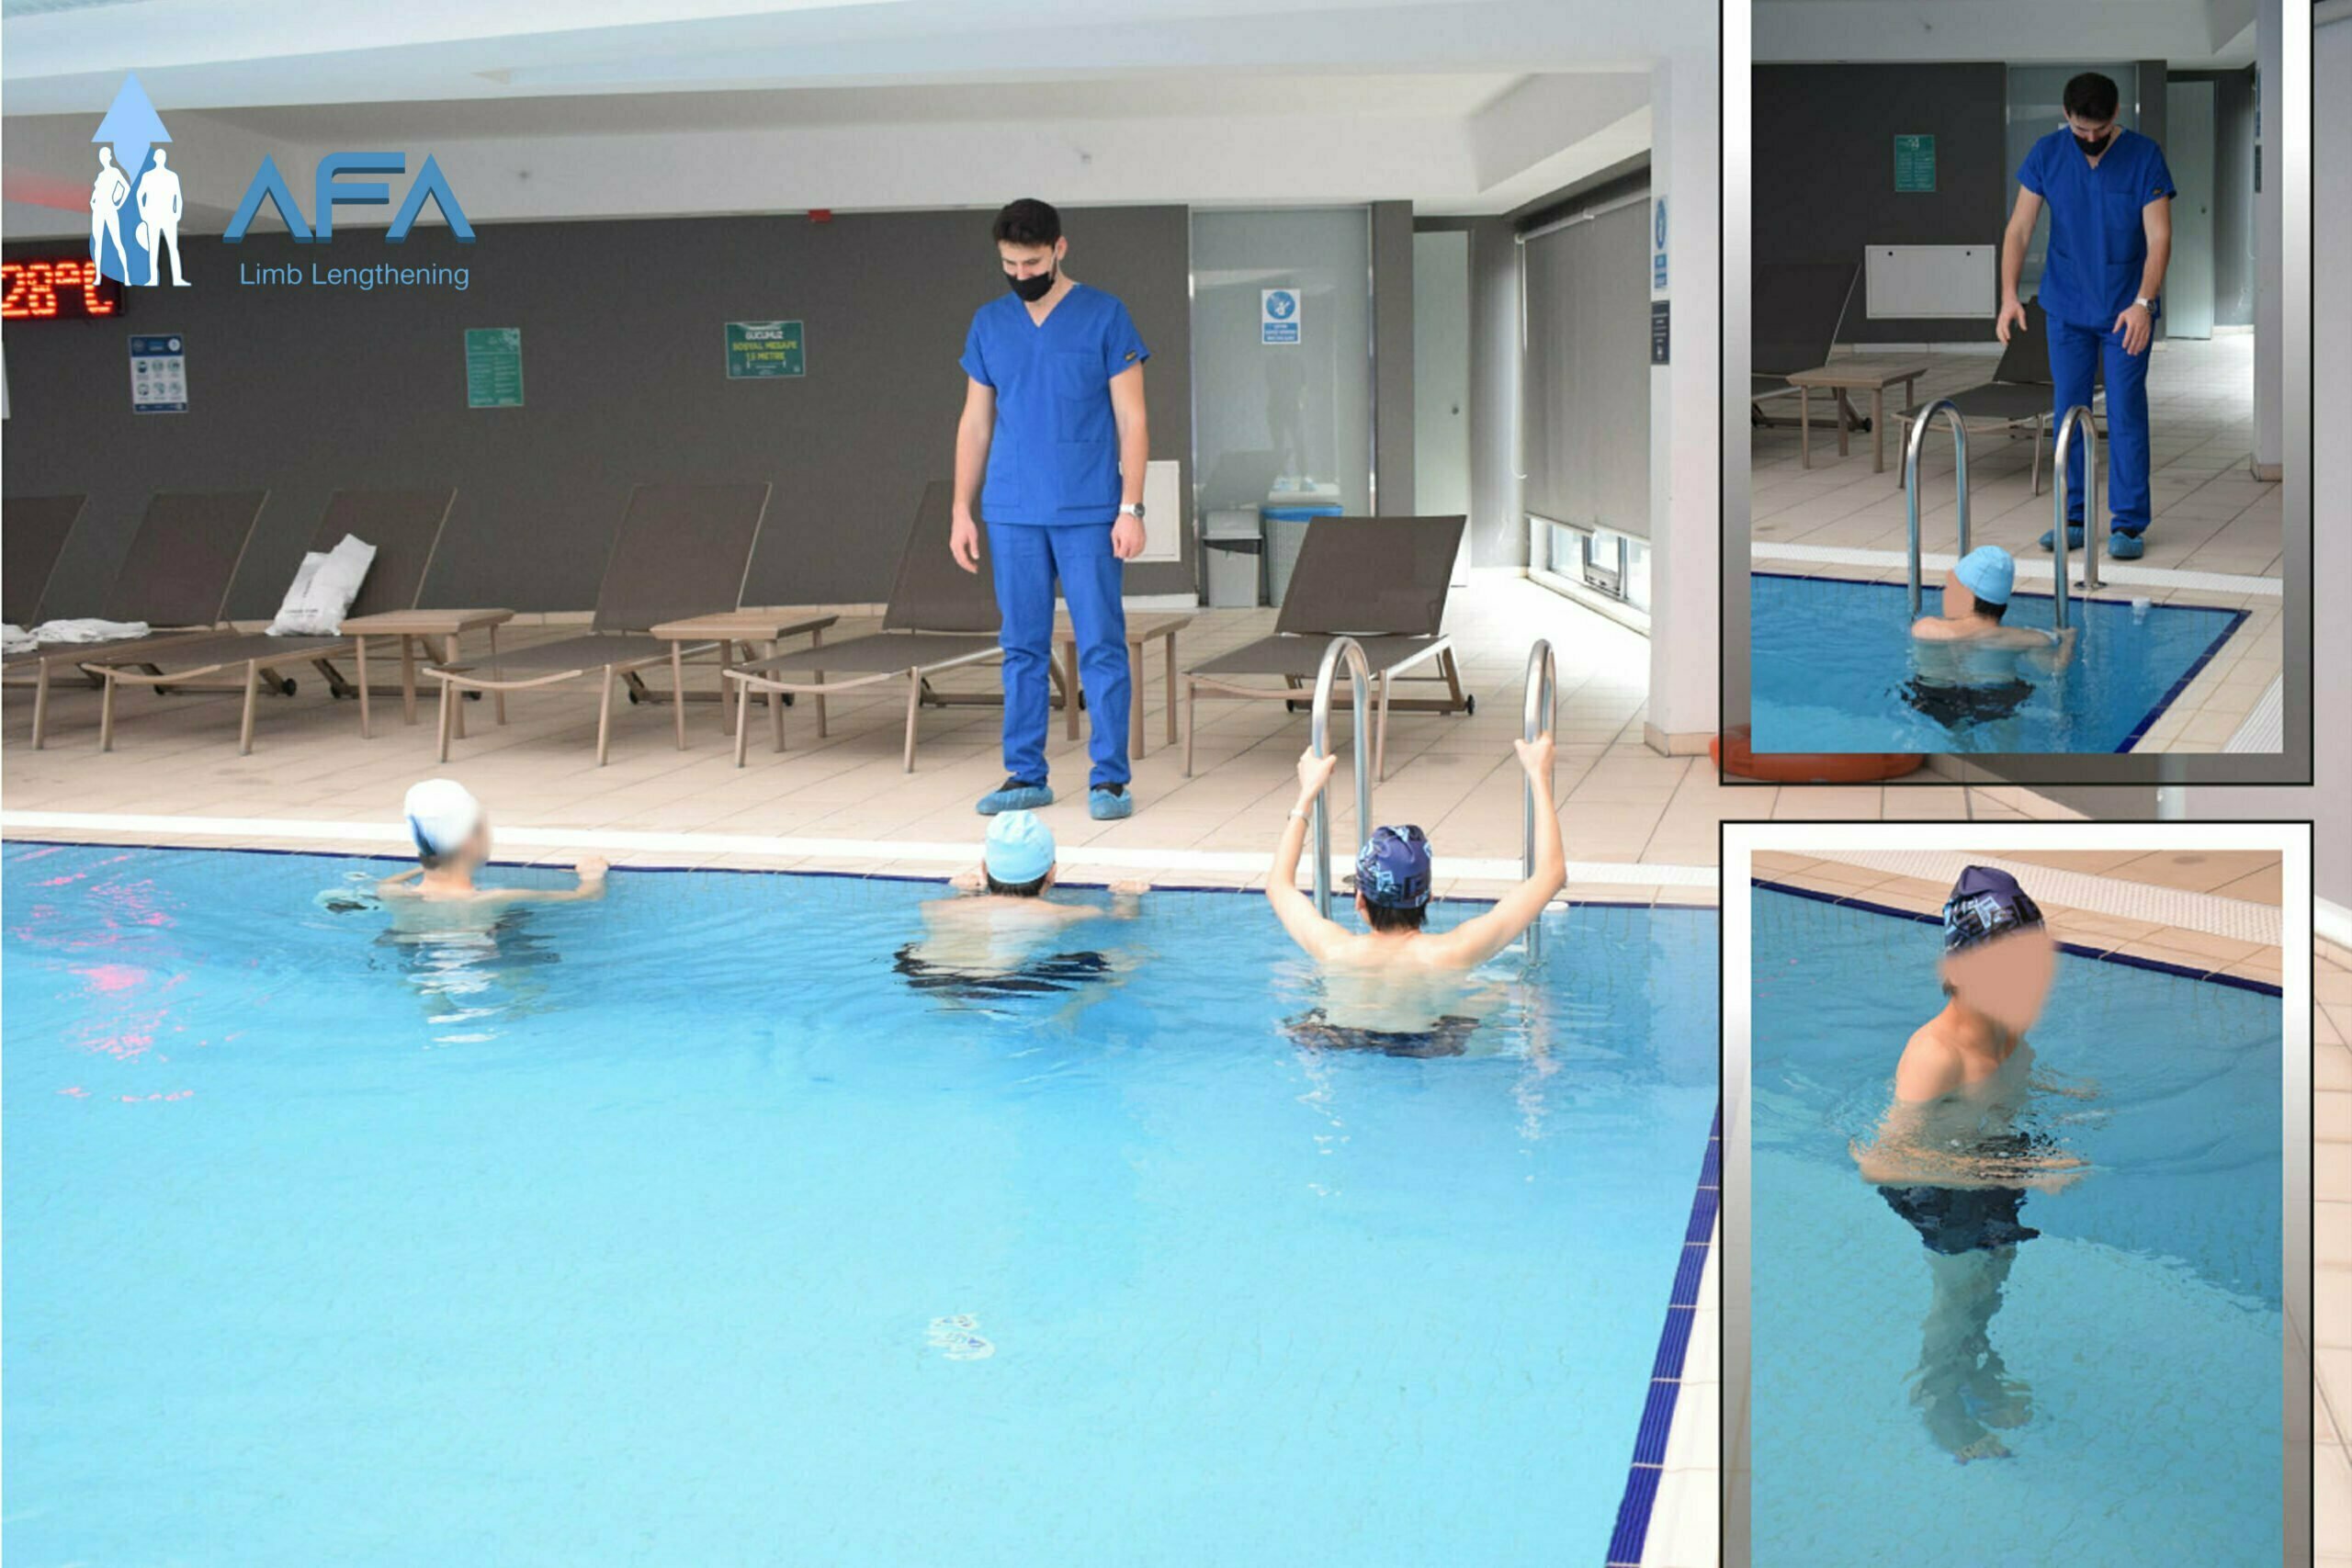 hydrotherapy exercises after limb lengthening surgery